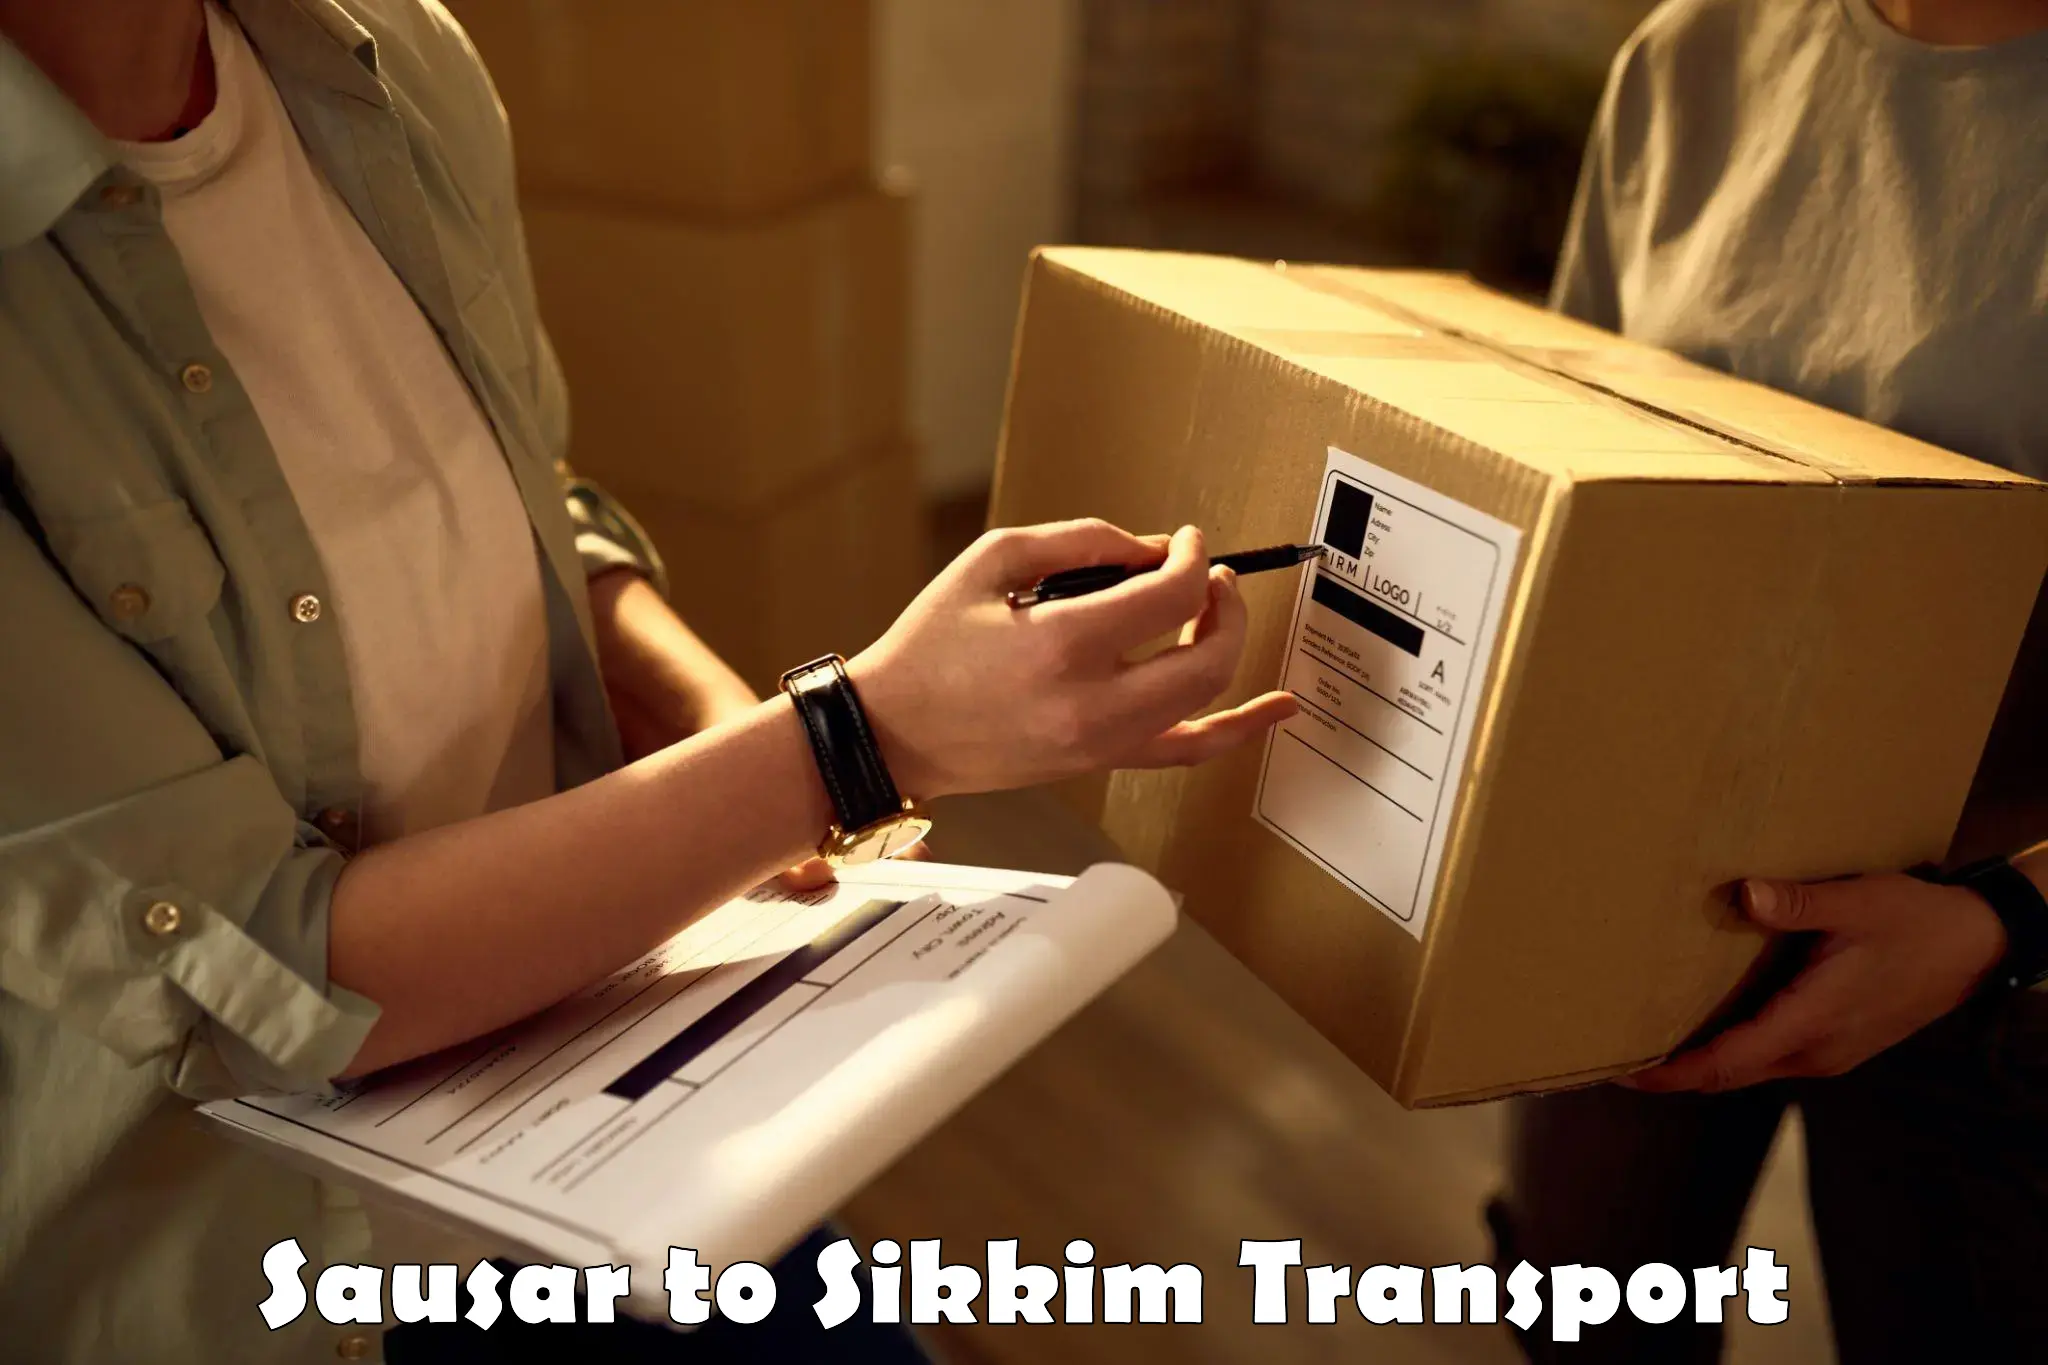 Bike shipping service Sausar to Pelling